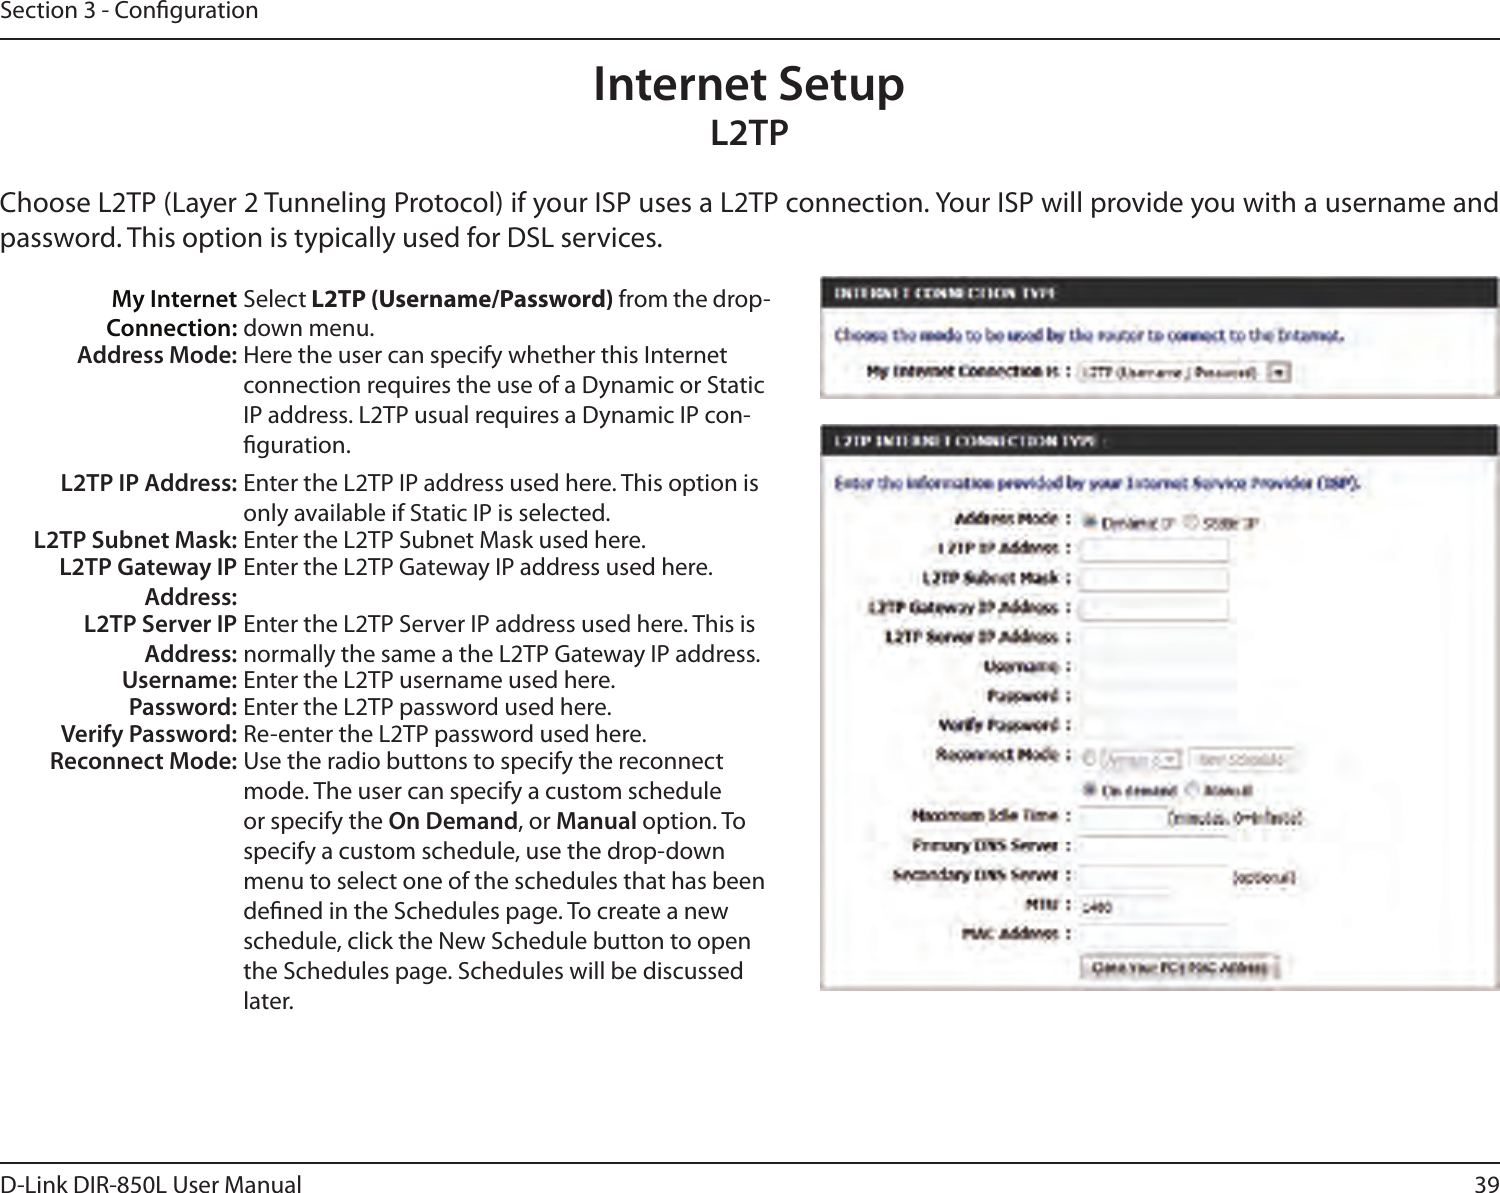 39D-Link DIR-850L User ManualSection 3 - CongurationInternet SetupL2TPChoose L2TP (Layer 2 Tunneling Protocol) if your ISP uses a L2TP connection. Your ISP will provide you with a username and password. This option is typically used for DSL services. My Internet Connection:Select L2TP (Username/Password) from the drop-down menu.Address Mode: Here the user can specify whether this Internet connection requires the use of a Dynamic or Static IP address. L2TP usual requires a Dynamic IP con-guration.L2TP IP Address: Enter the L2TP IP address used here. This option is only available if Static IP is selected.L2TP Subnet Mask: Enter the L2TP Subnet Mask used here.L2TP Gateway IP Address:Enter the L2TP Gateway IP address used here.L2TP Server IP Address:Enter the L2TP Server IP address used here. This is normally the same a the L2TP Gateway IP address.Username: Enter the L2TP username used here.Password: Enter the L2TP password used here.Verify Password: Re-enter the L2TP password used here.Reconnect Mode: Use the radio buttons to specify the reconnect mode. The user can specify a custom schedule or specify the On Demand, or Manual option. To specify a custom schedule, use the drop-down menu to select one of the schedules that has been dened in the Schedules page. To create a new schedule, click the New Schedule button to open the Schedules page. Schedules will be discussed later.